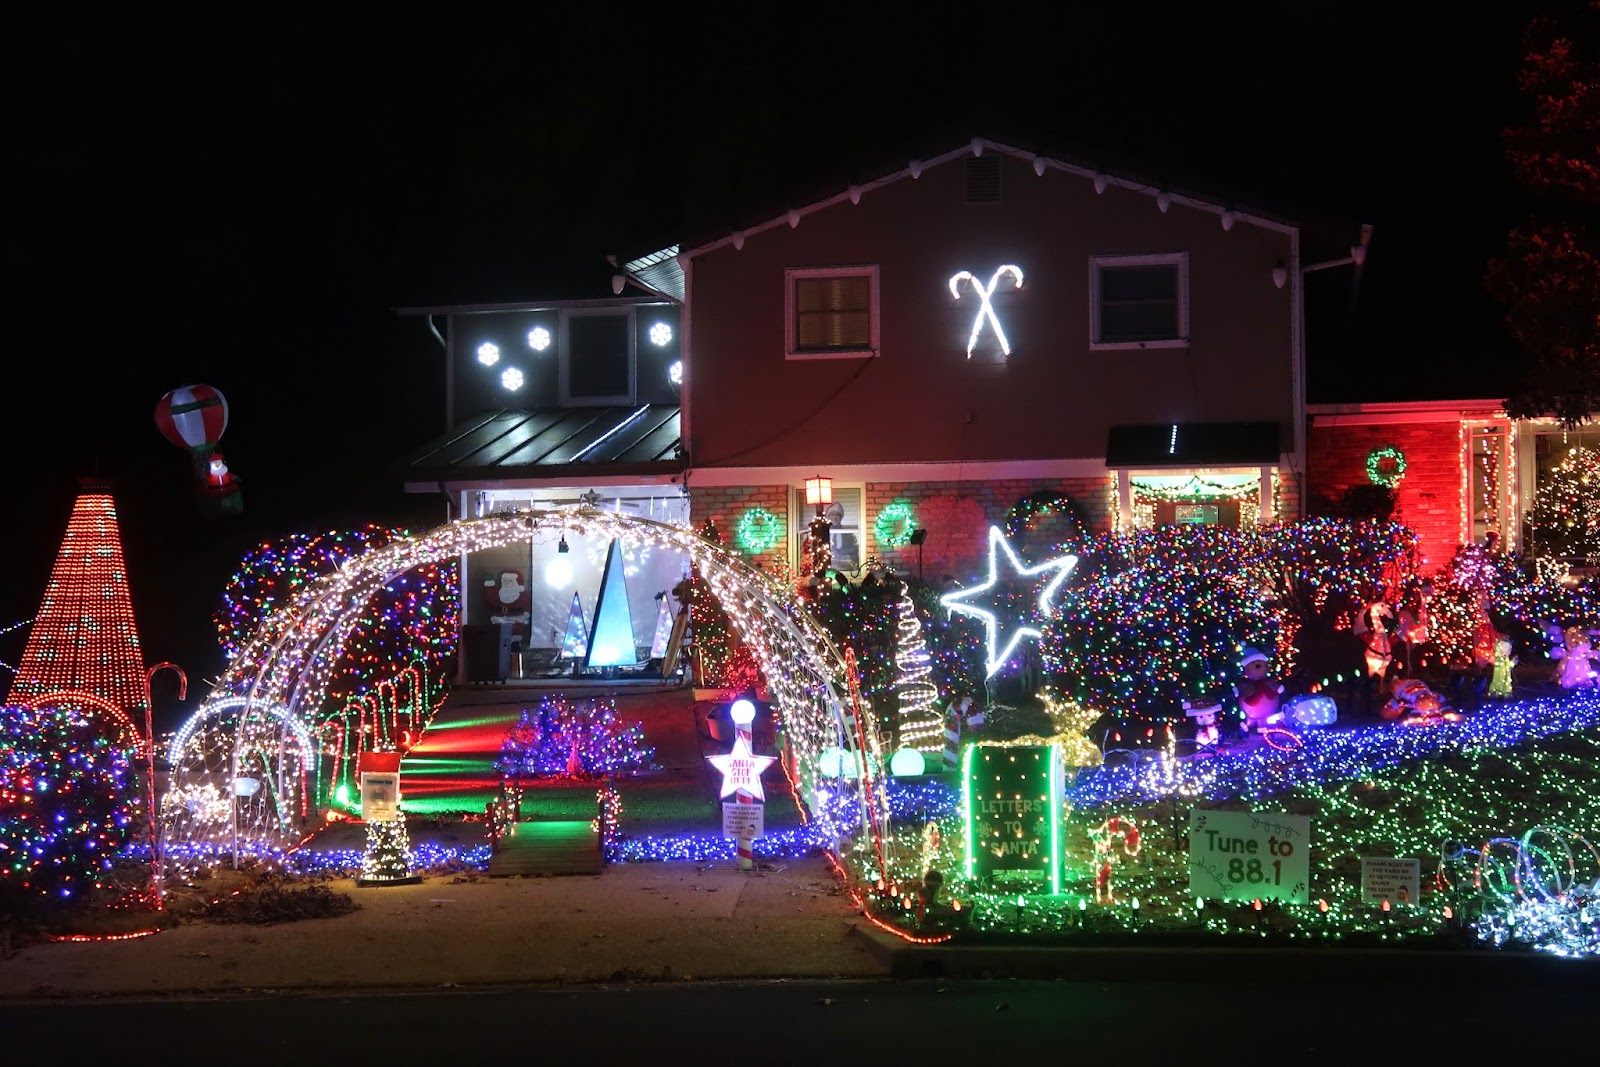 These Annandale homes light up the neighborhood | Annandale Today